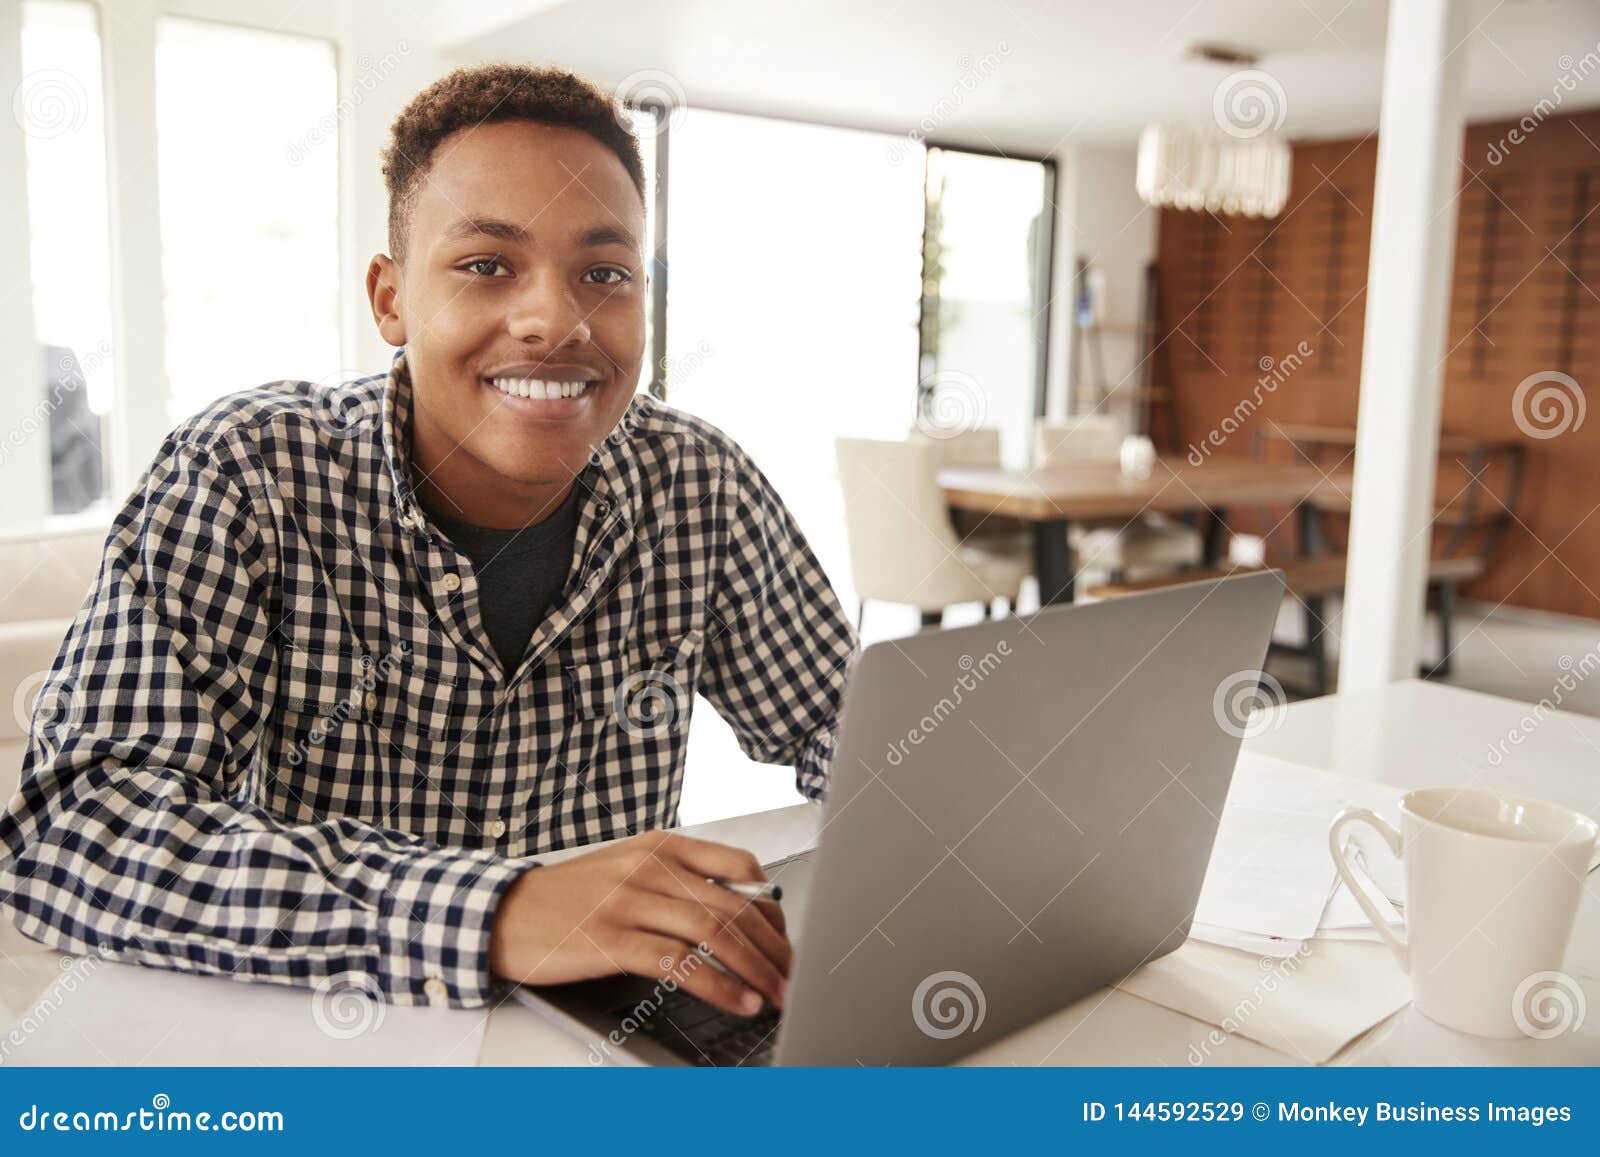 african american  male teenager using a laptop computer at home smiling to camera, close up